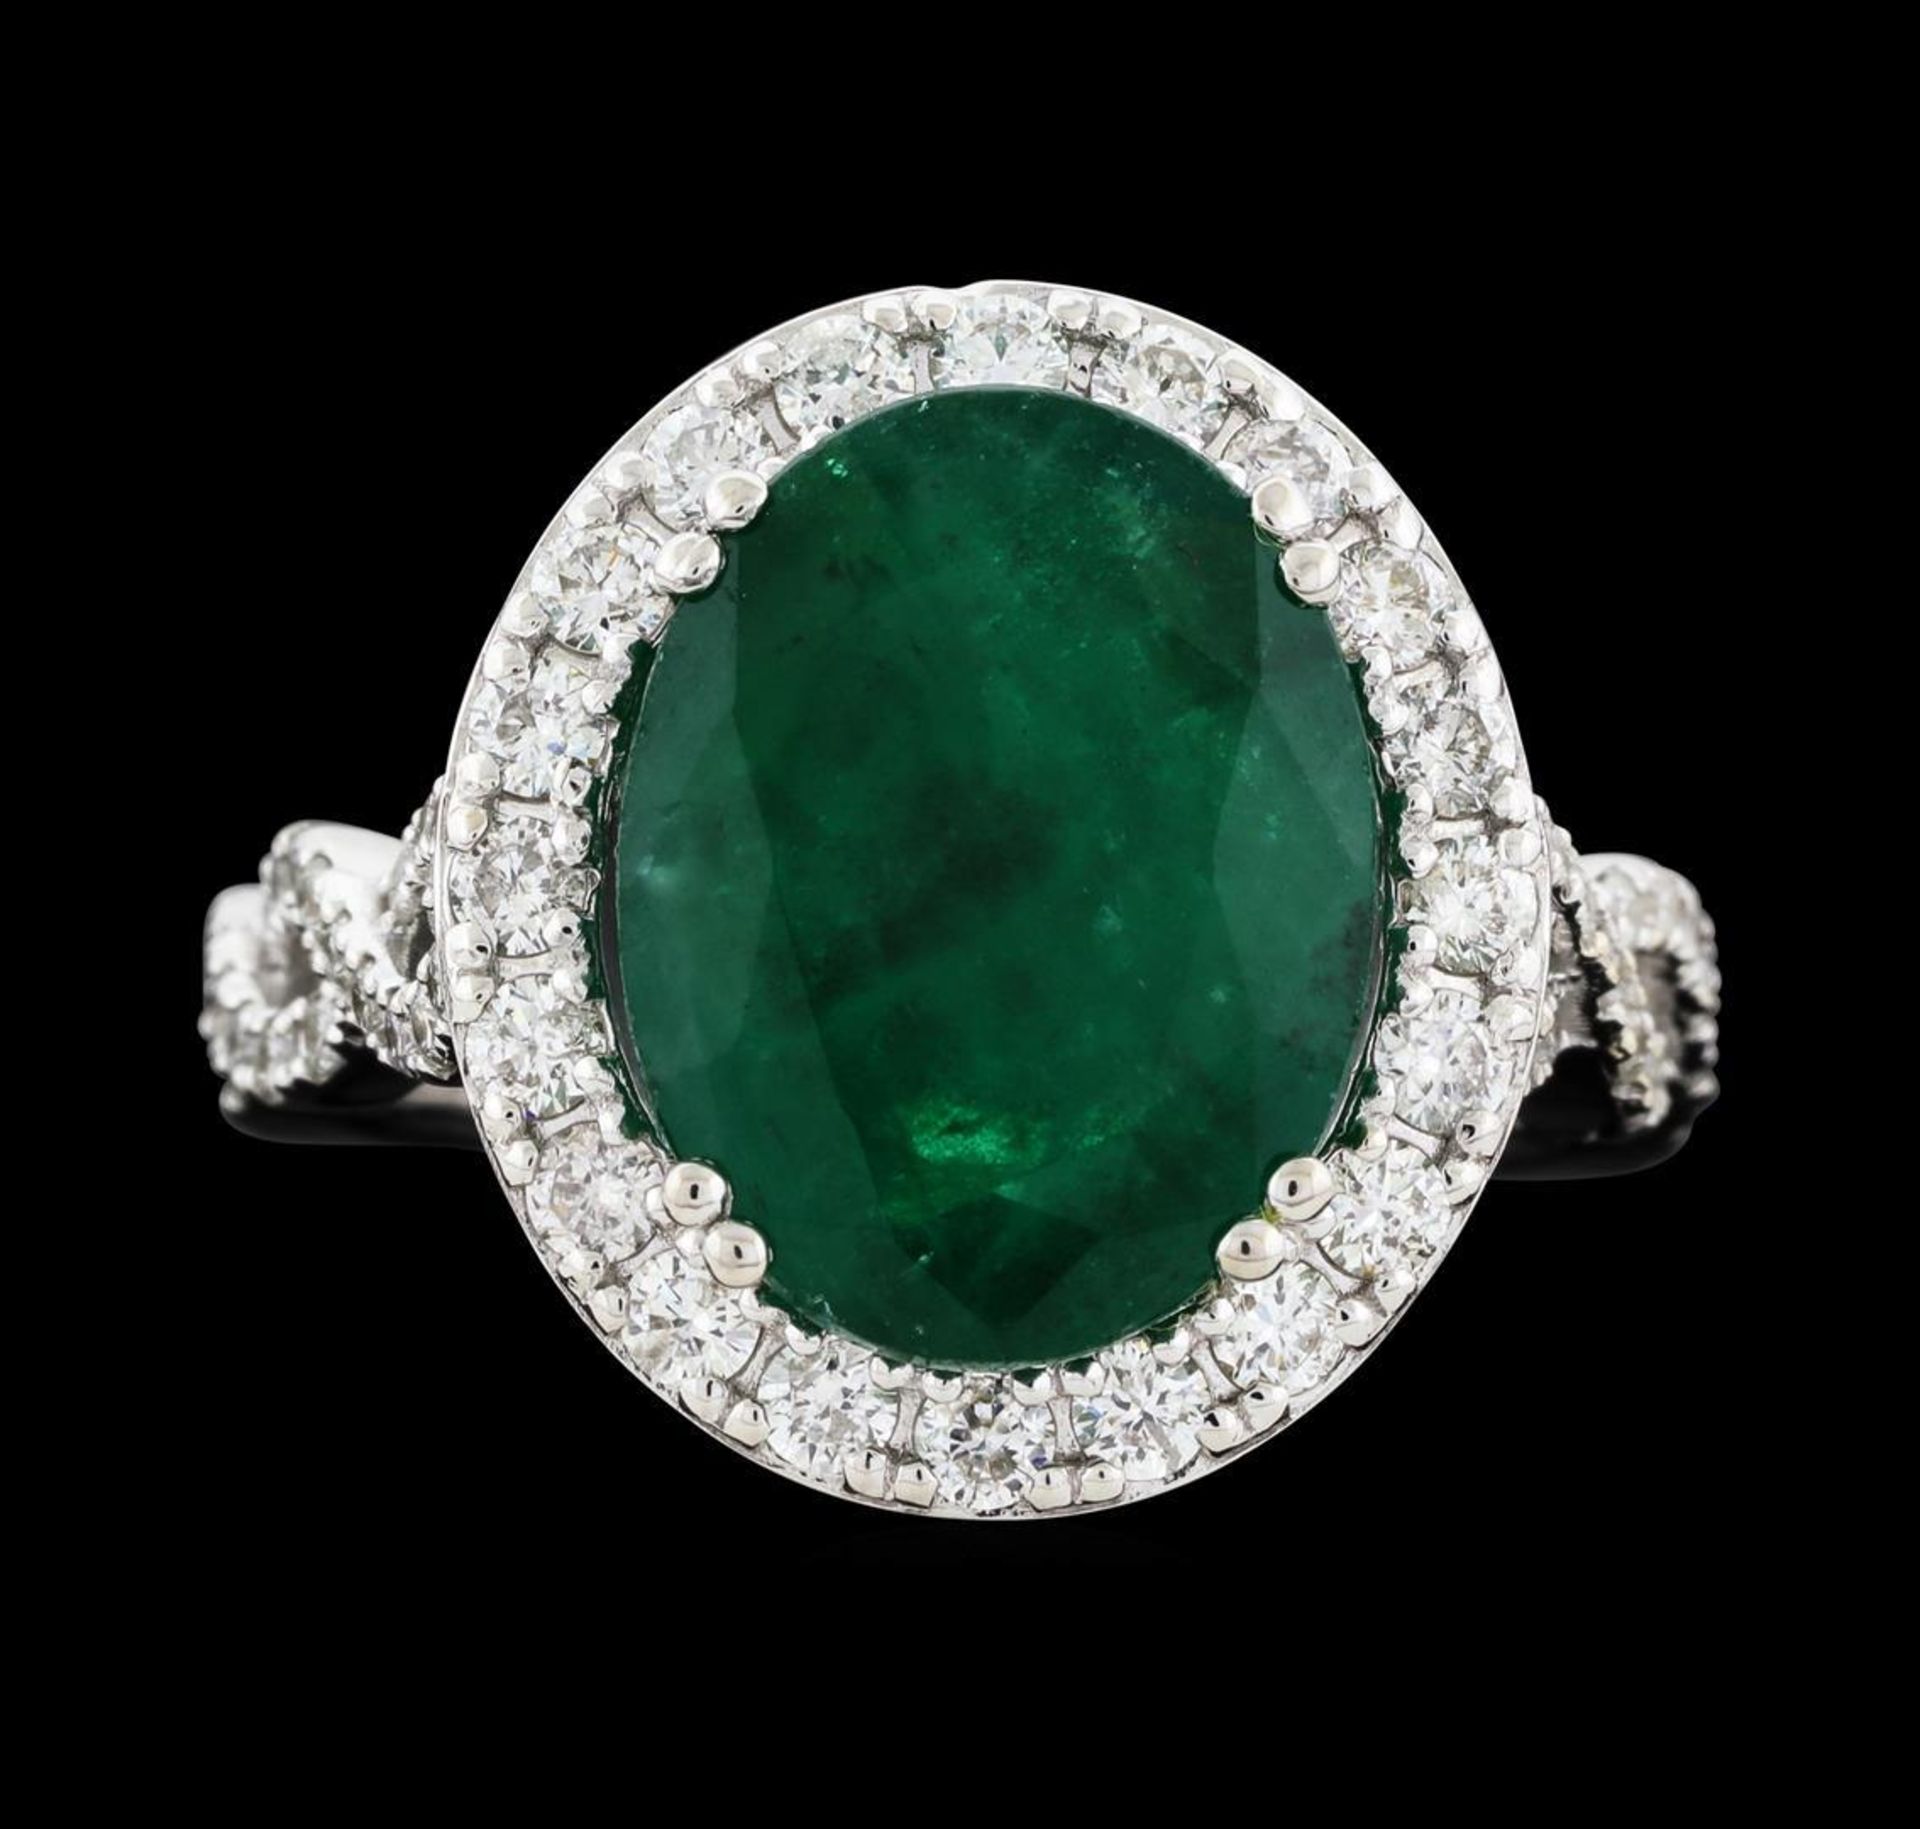 5.68 ctw Emerald and Diamond Ring - 14KT White Gold - Image 2 of 5